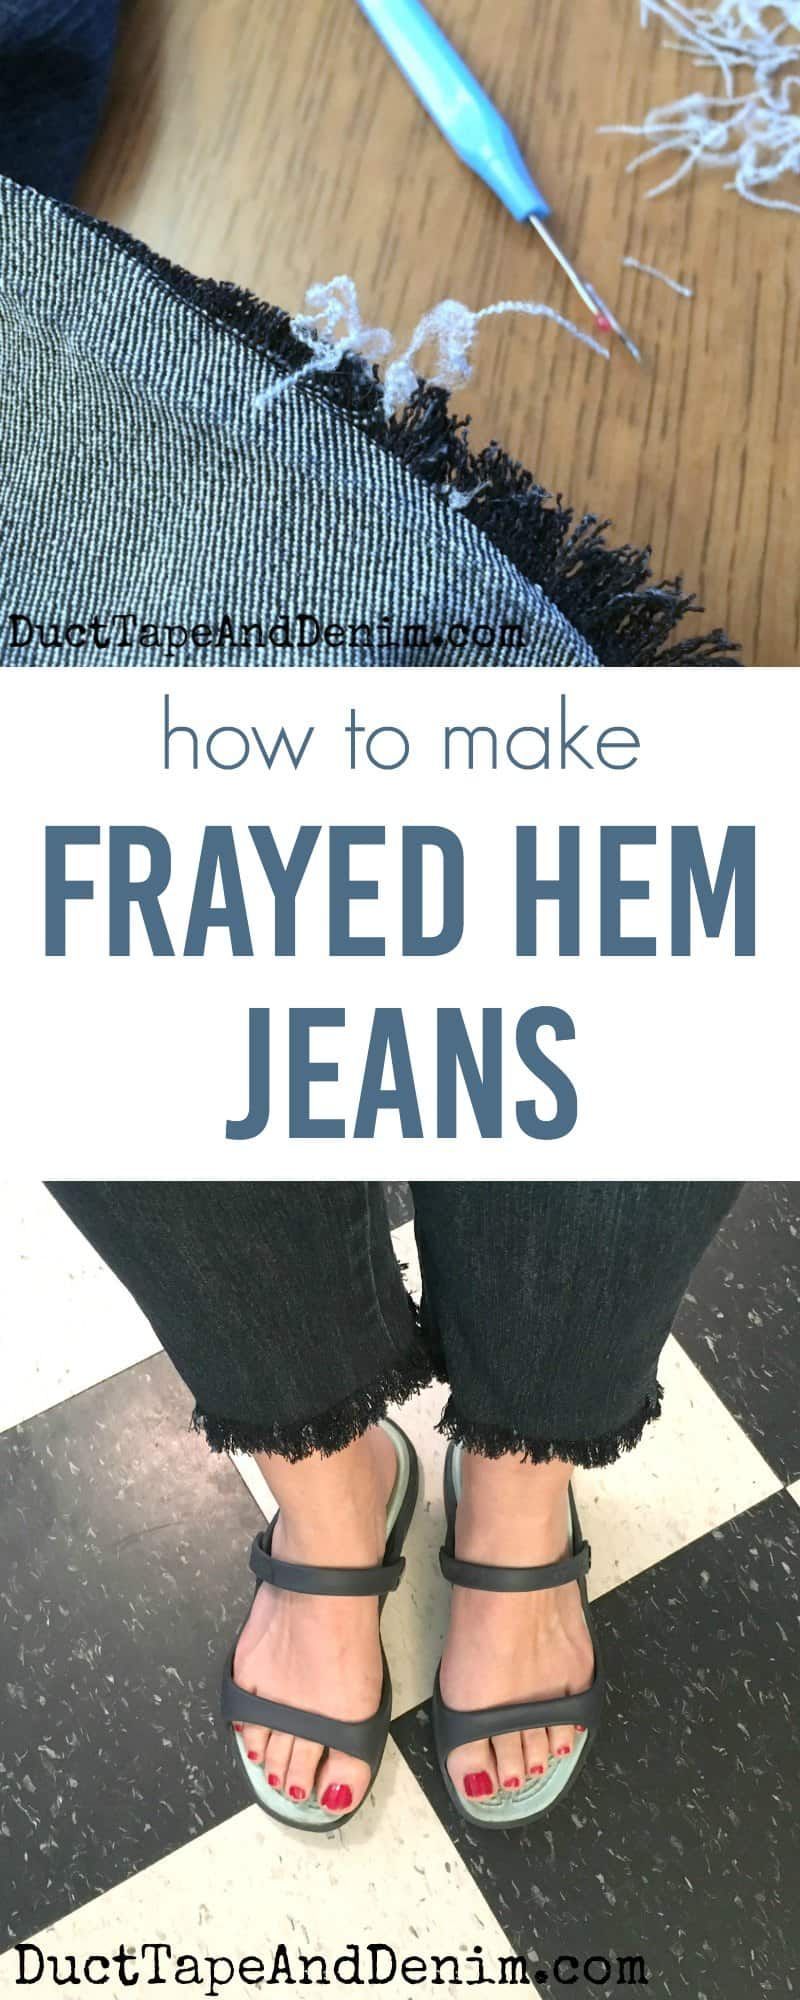 How to Make Frayed Hem Jeans from Thrift Store Clothing -   11 thrift store DIY Clothes Vintage ideas